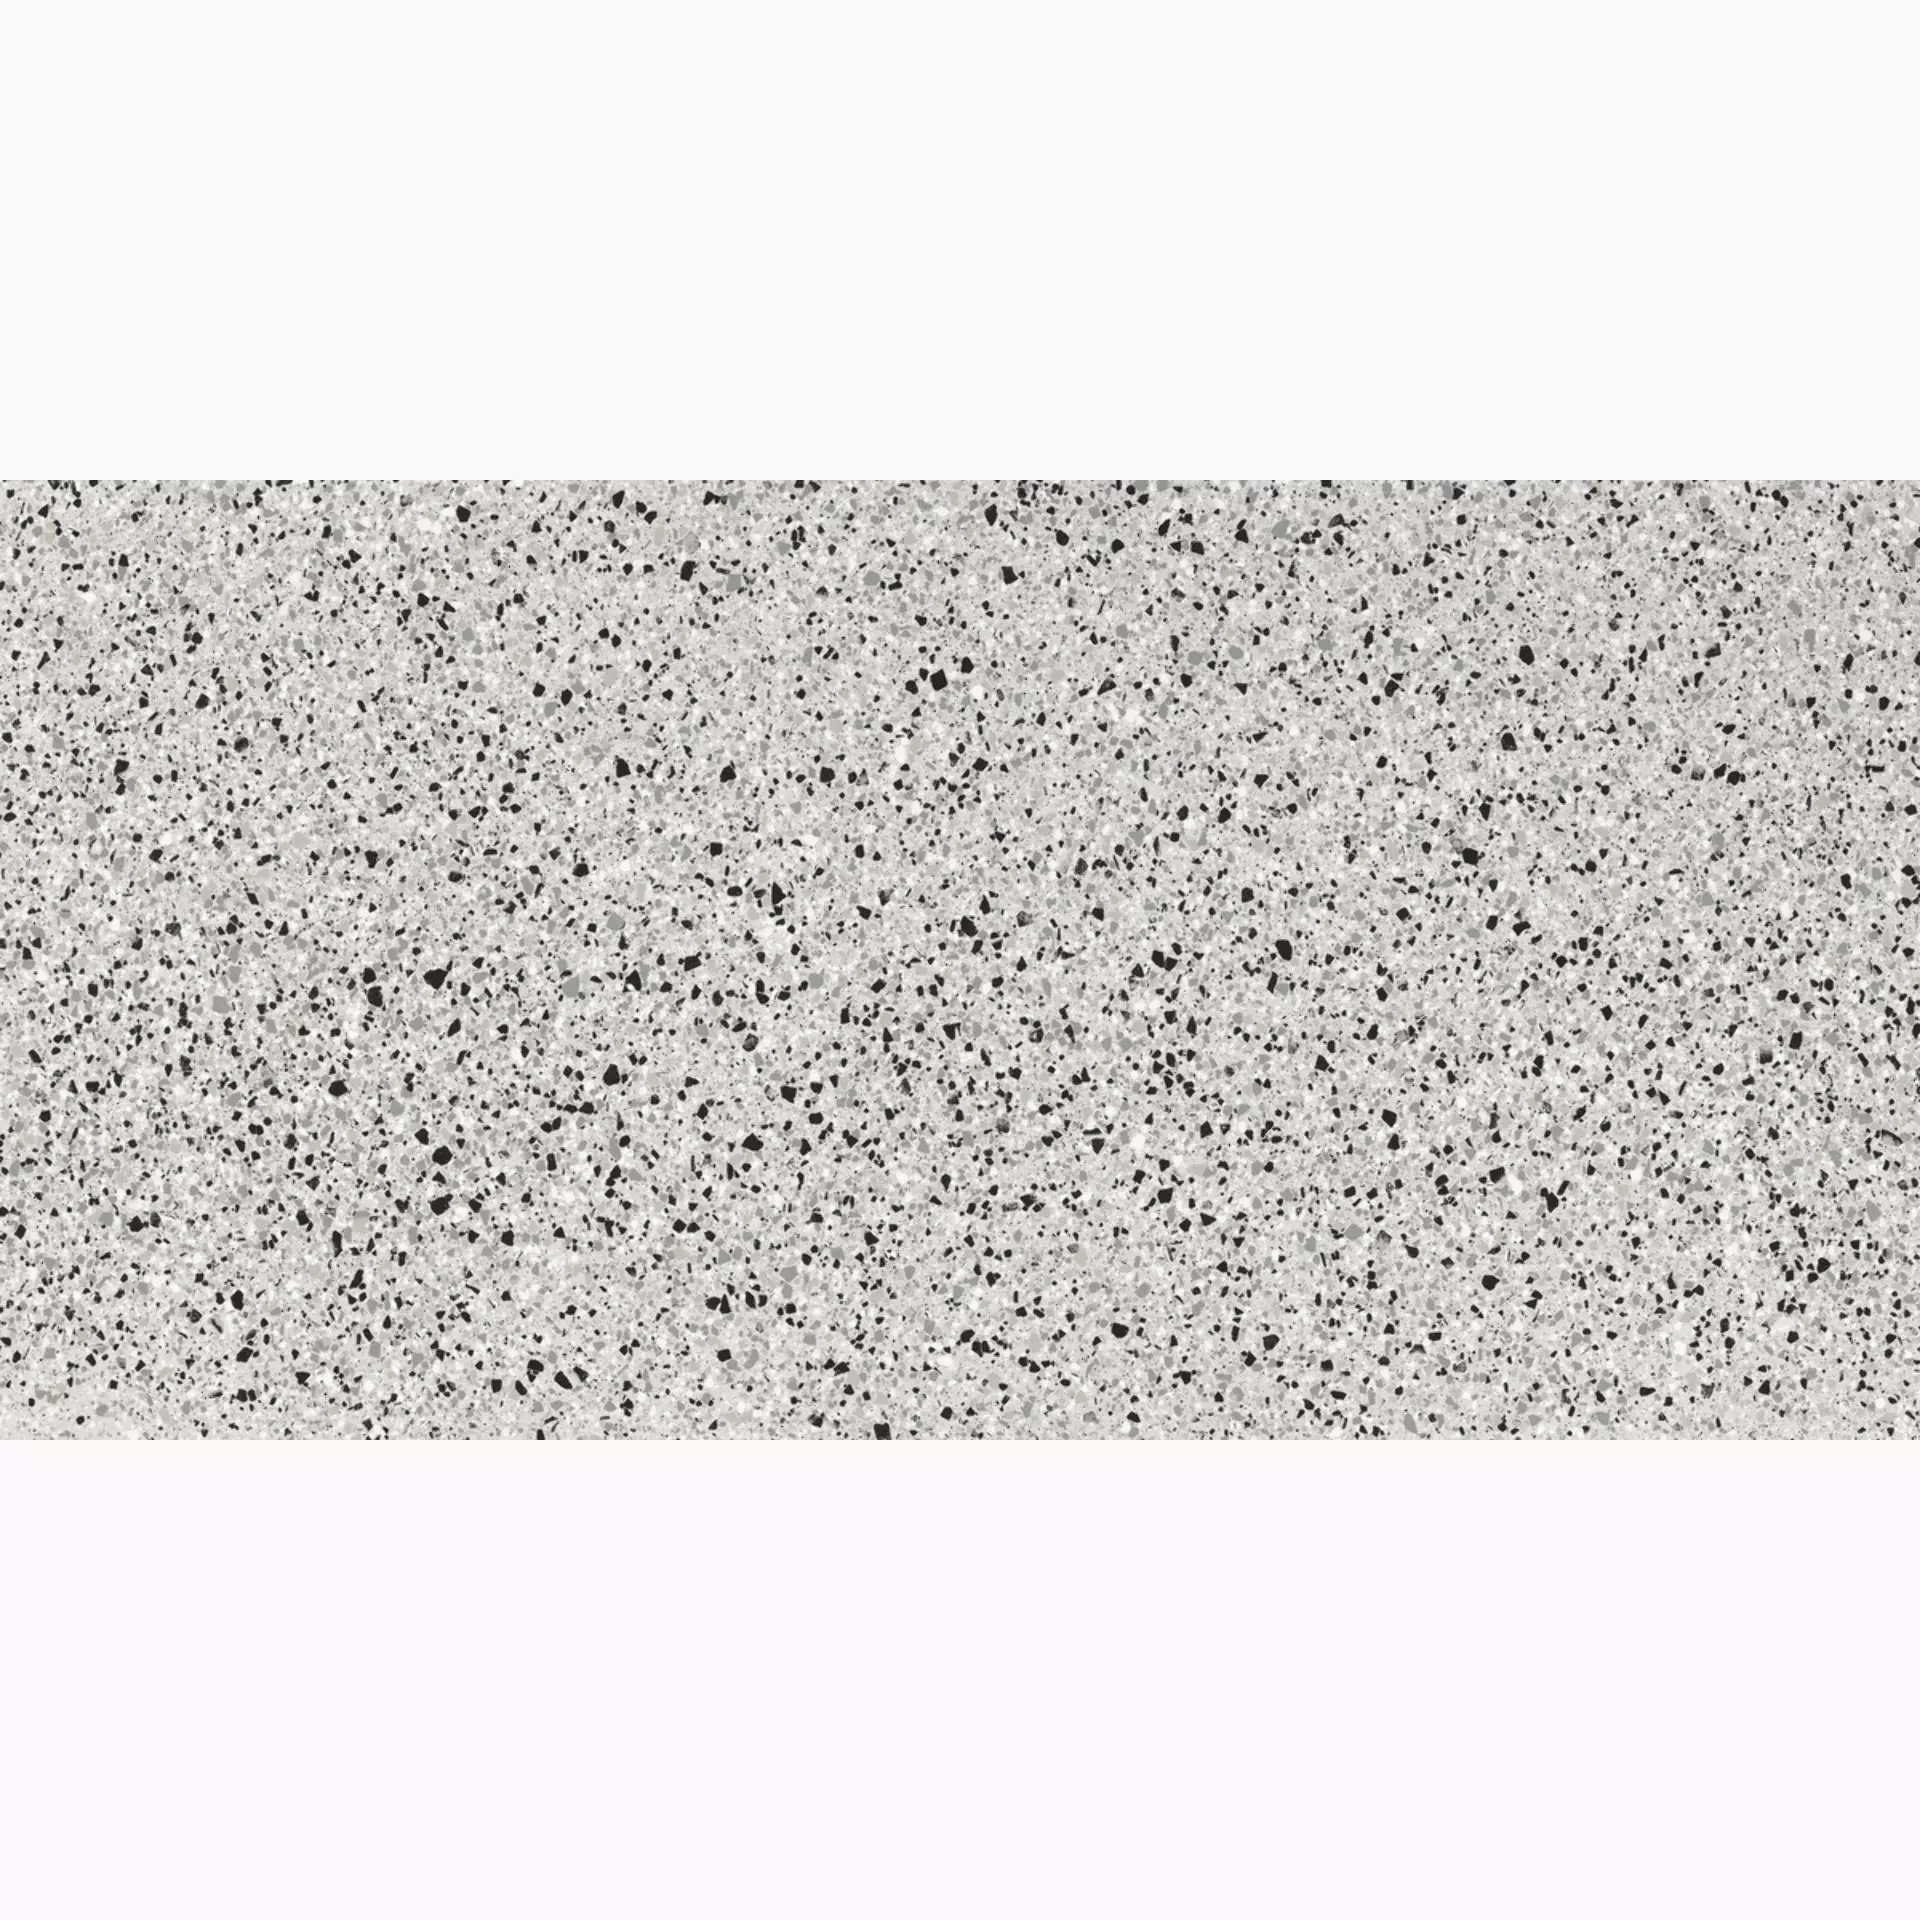 FMG Rialto Silver Naturale P62421 60x120cm rectified 10mm